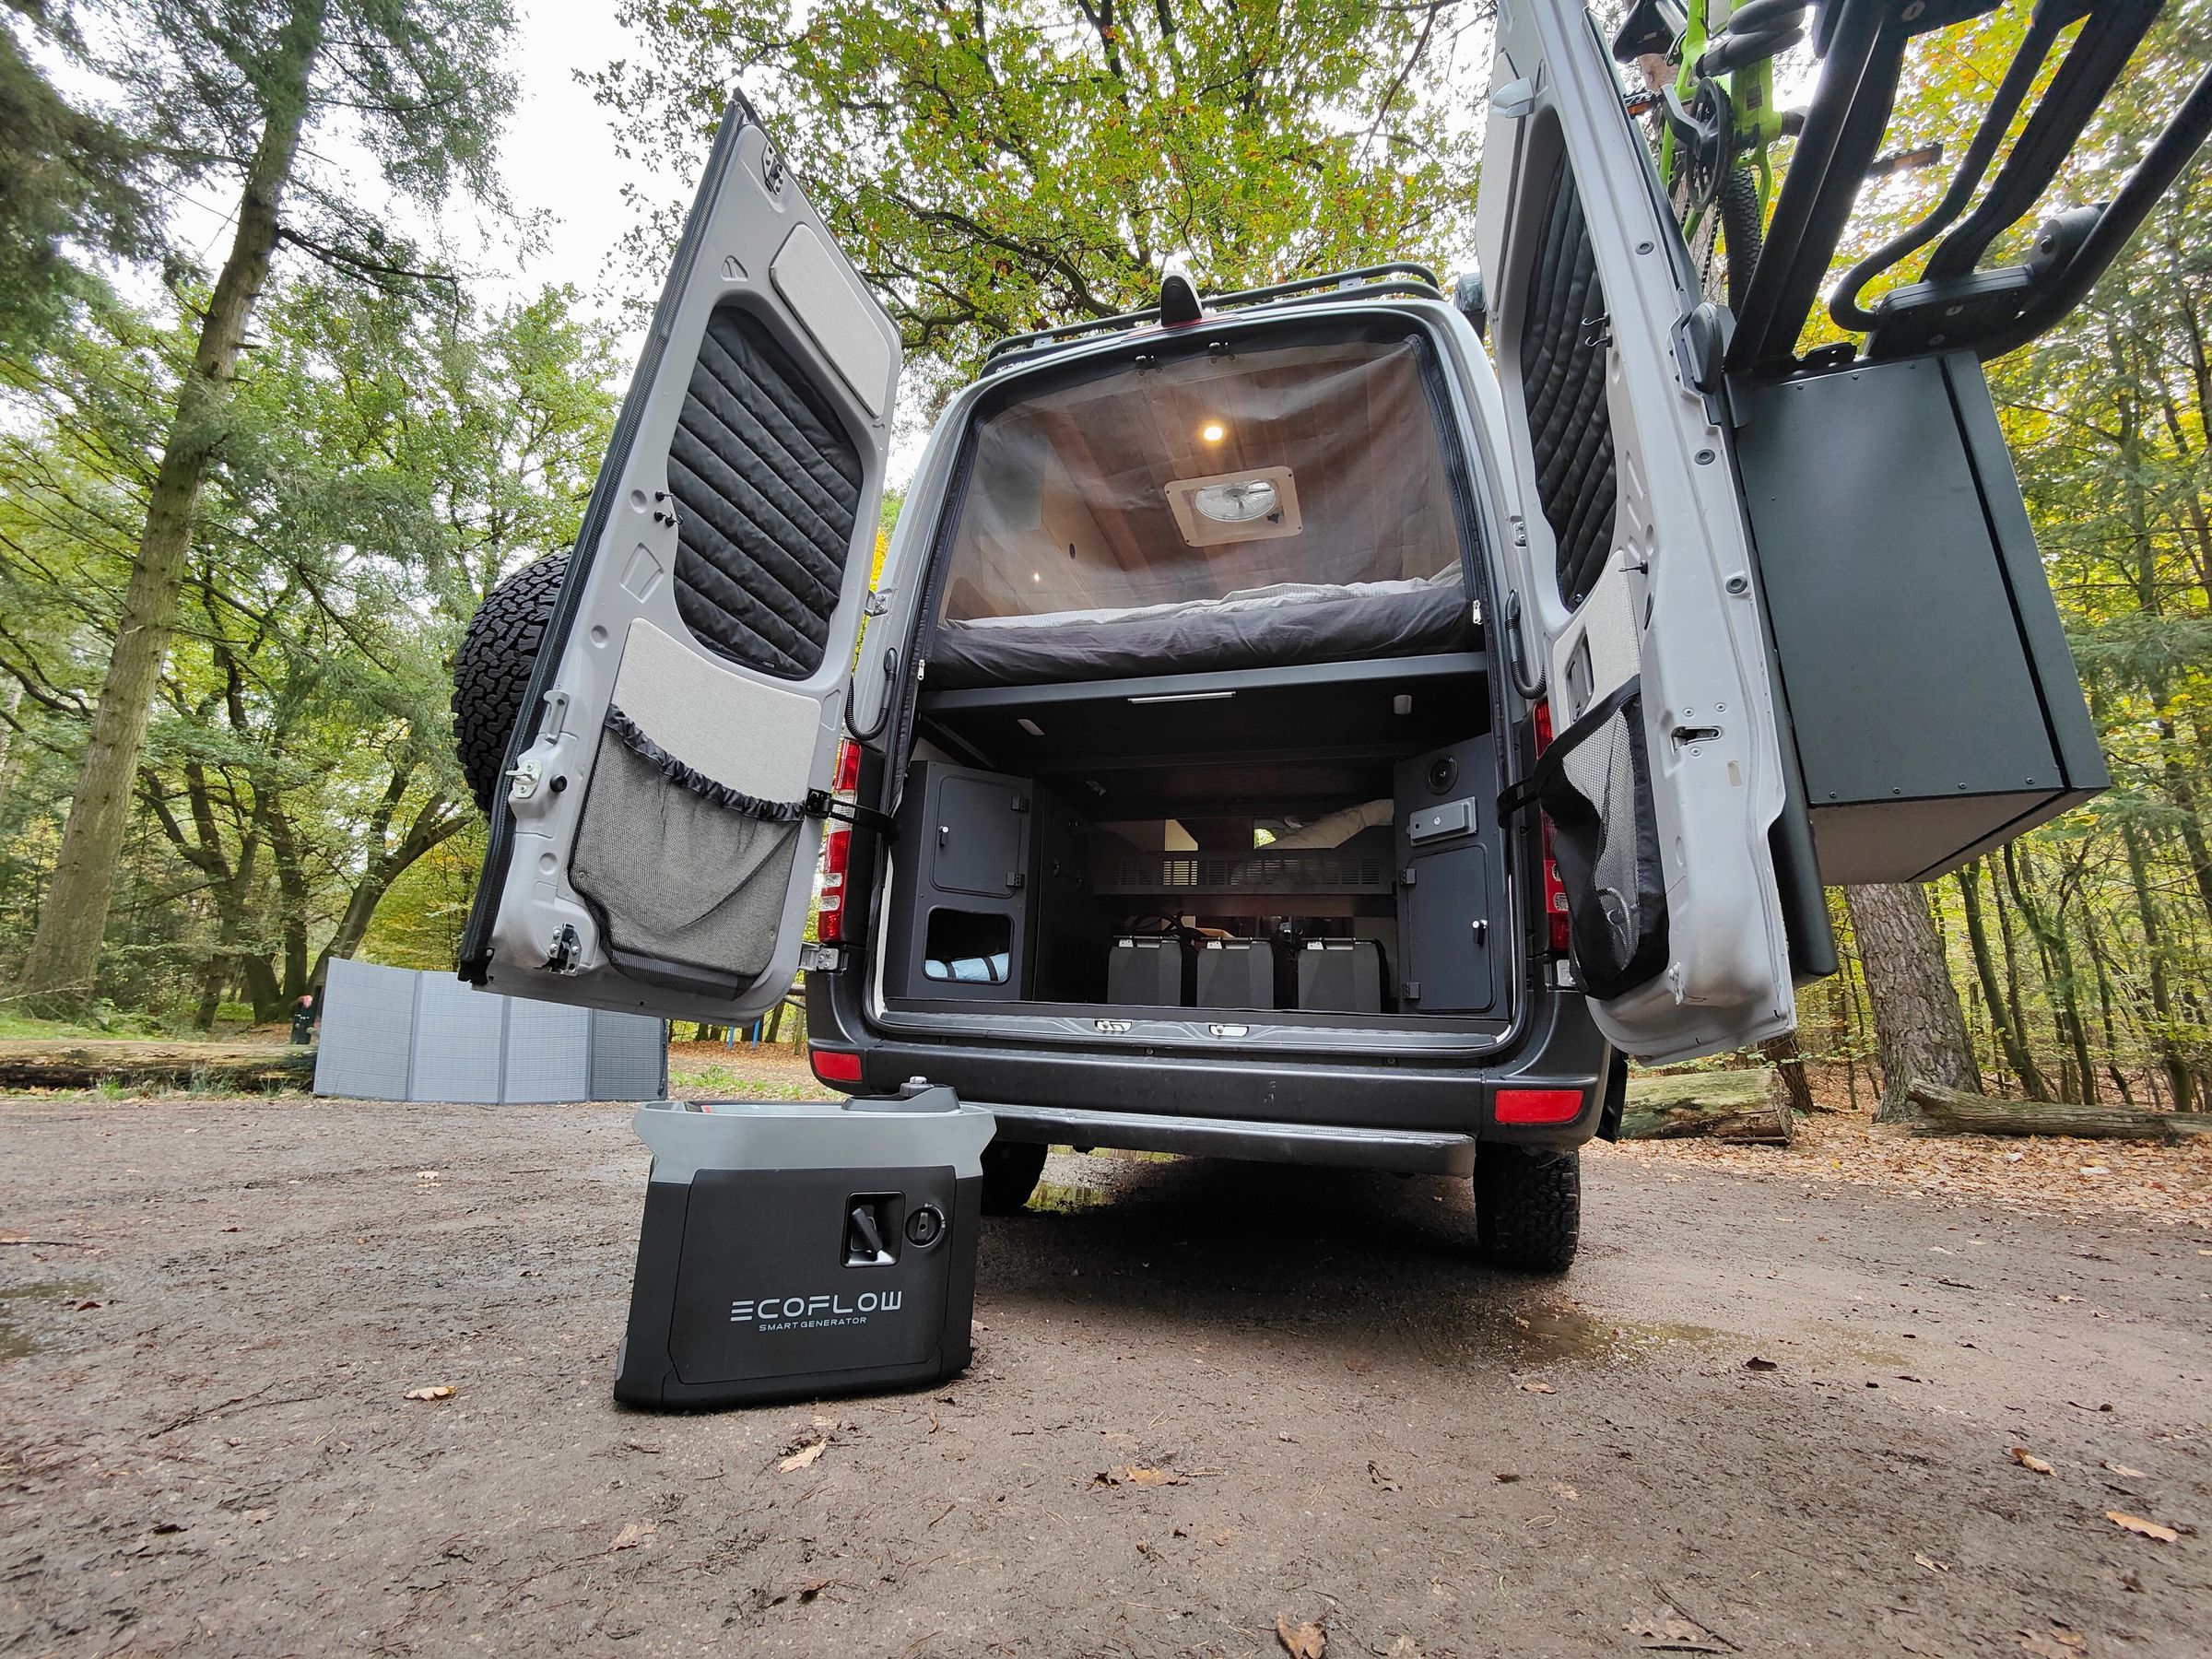 Here’s a custom RV I reviewed from Origin Travelvans with a massive EcoFlow Power Kit (inside), an EcoFlow 400W folding solar panel (and more on the roof), and EcoFlow Smart Generator (on the ground) for unlimited off-grid adventuring.